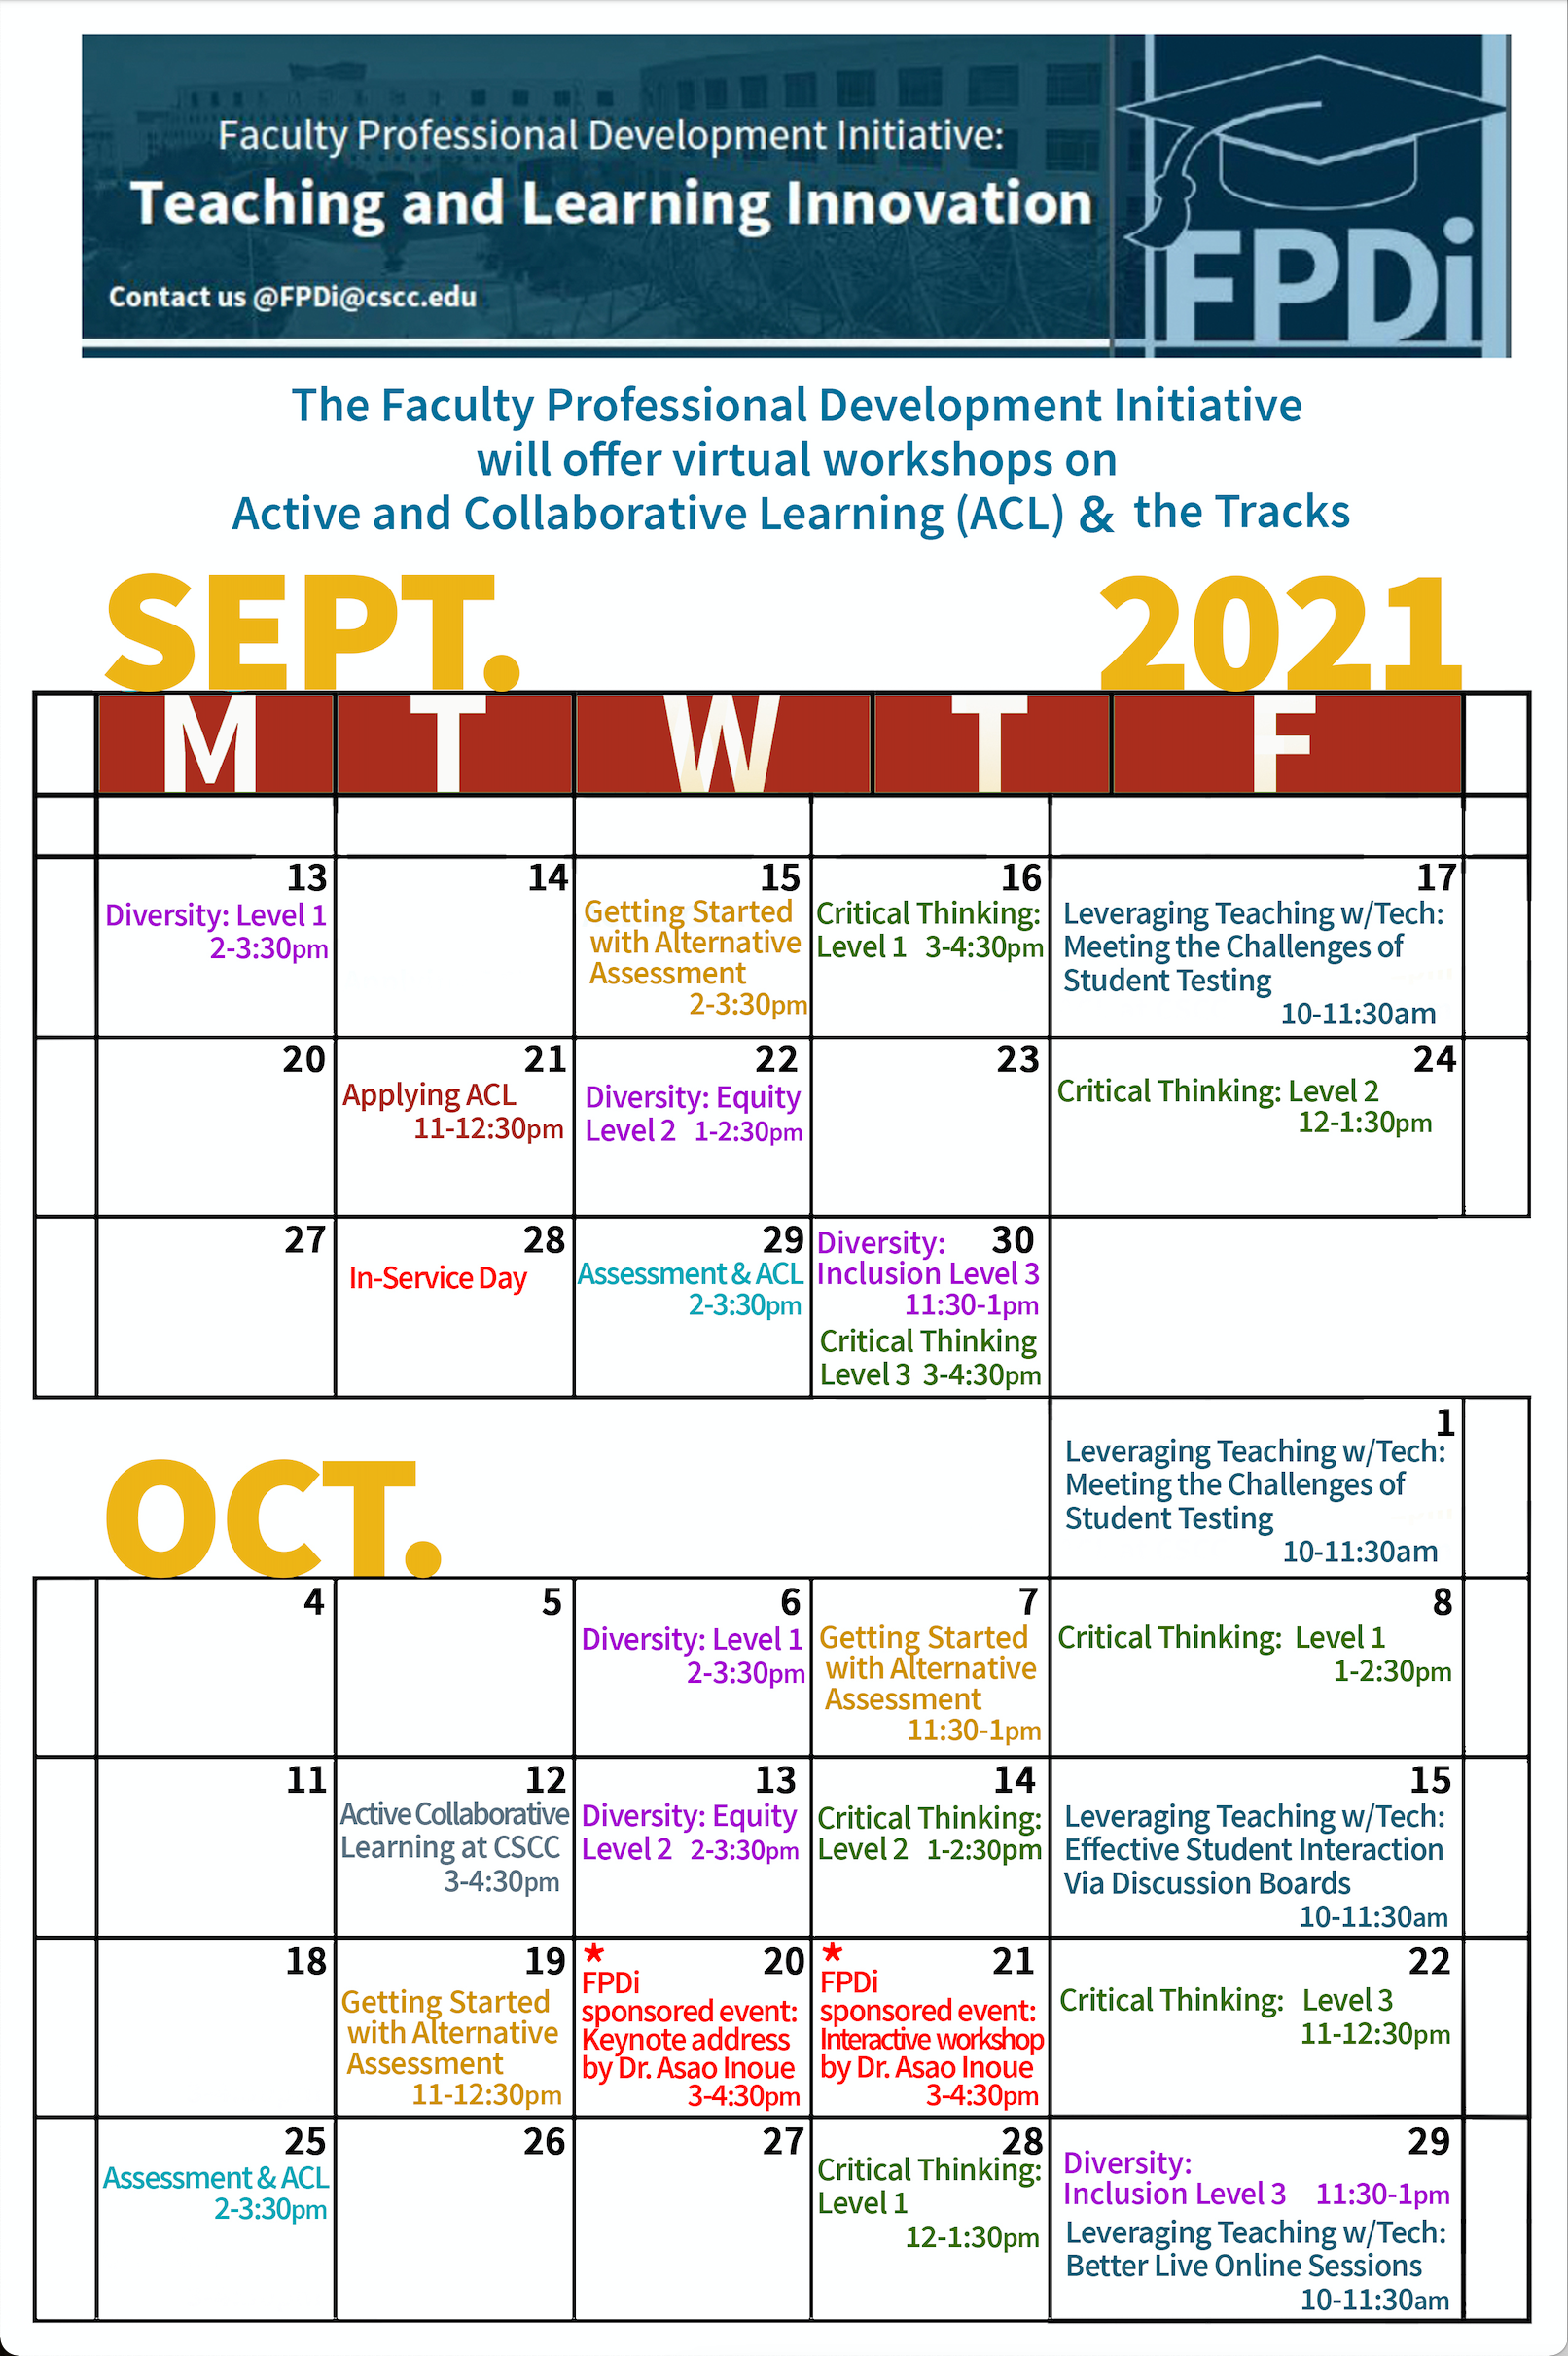 The FPDi autumn schedule for September and October.